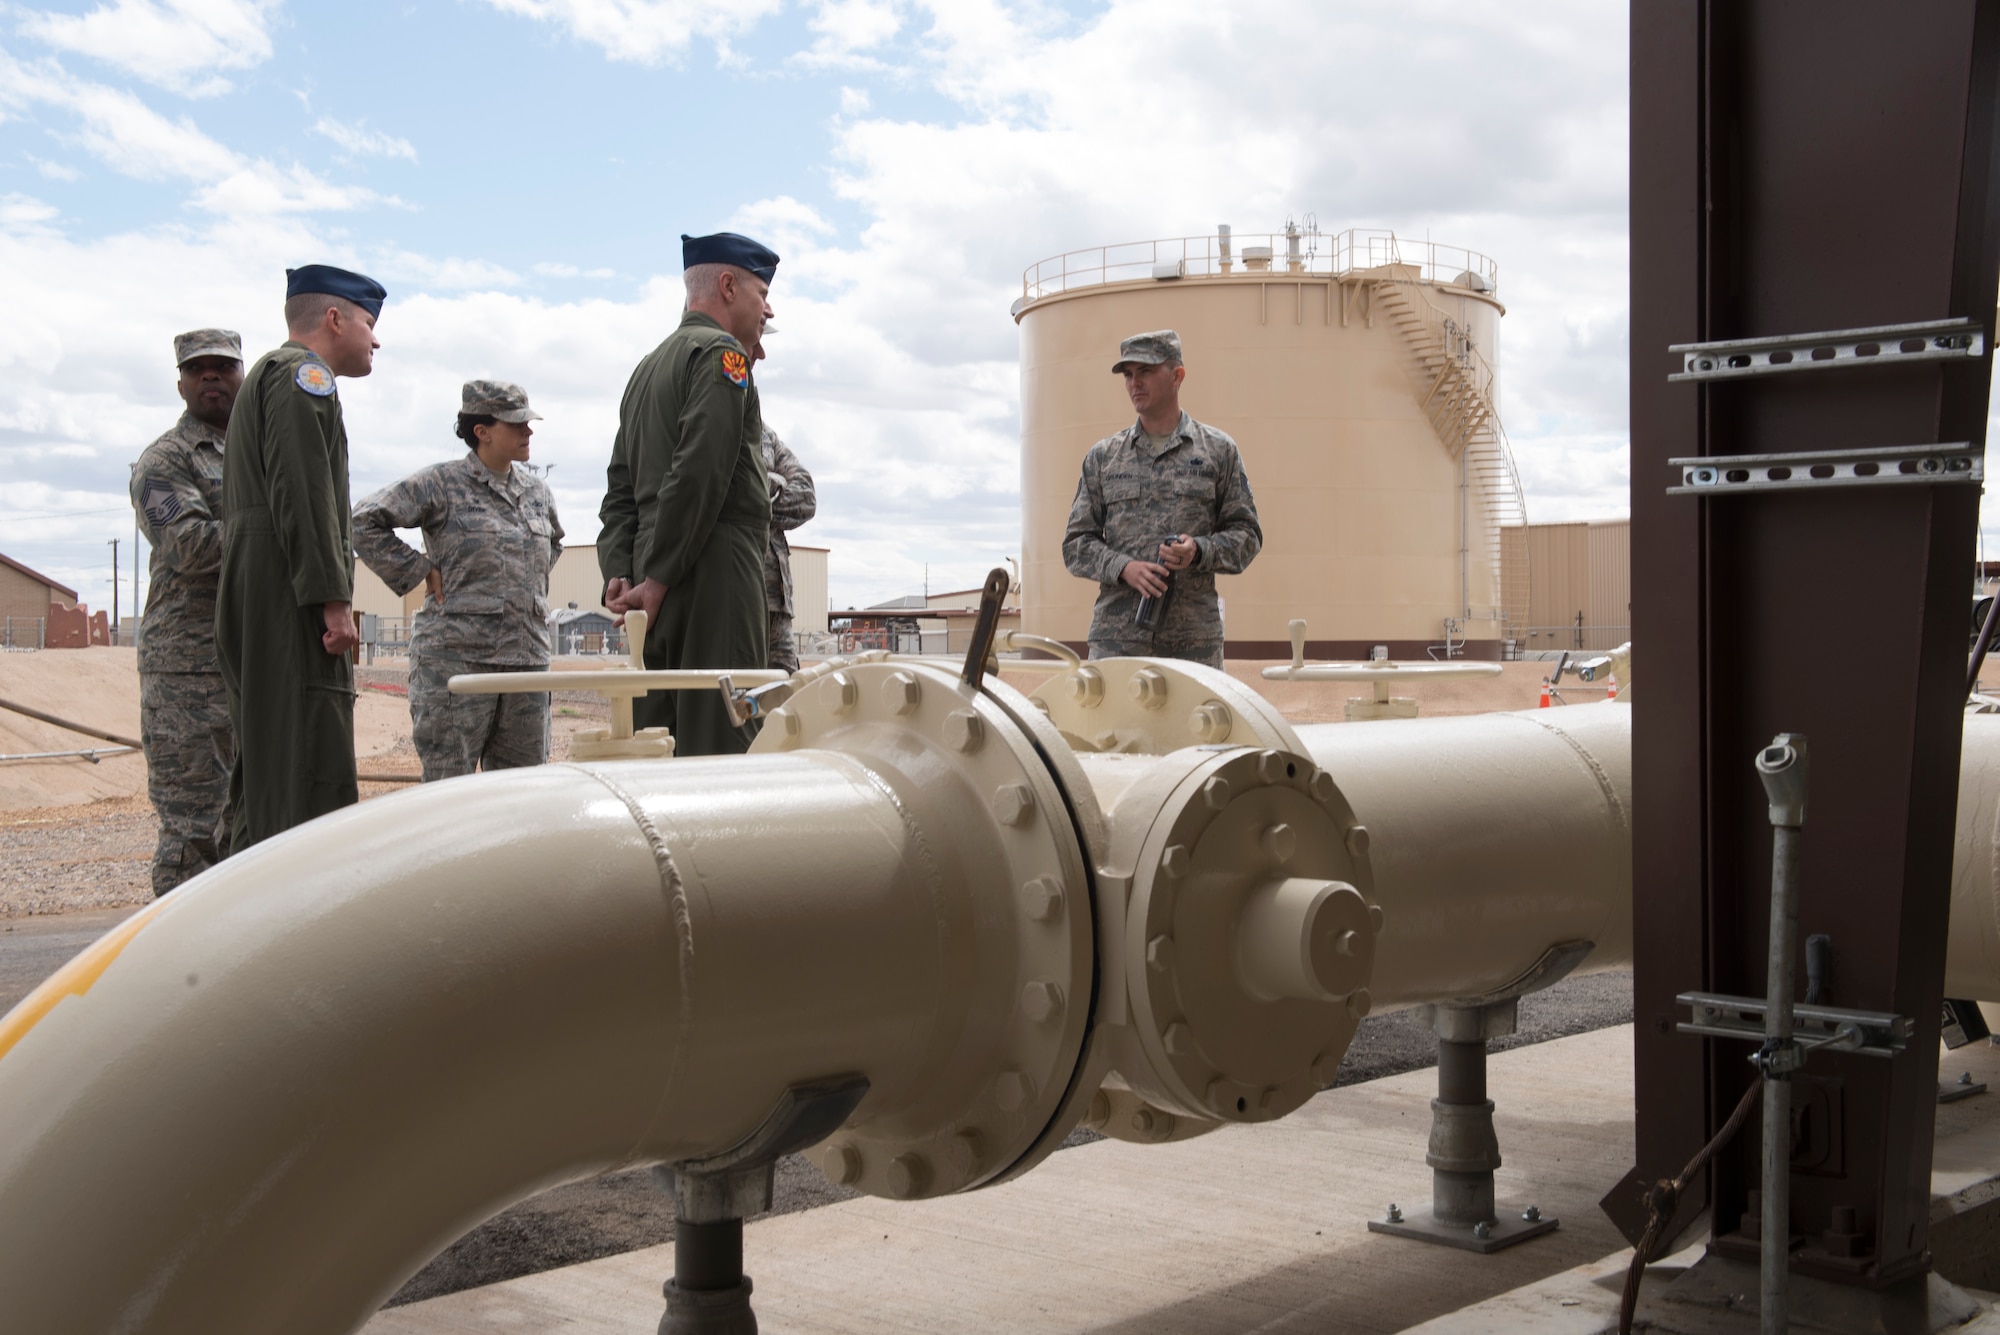 Tech. Sgt. Donald Grunden, 56th Logistics Readiness Squadron Fuels Management operator, briefs members of Luke’s command team on the new fuel pump house following its ribbon-cutting ceremony at Luke Air Force Base, Ariz., March 15, 2018. The pump house, along with a simultaneously developed fill stand, will allow fuel trucks servicing jets to resupply directly from the flight line instead of having to drive to external pumps. (U.S. Air Force photo by Senior Airman Ridge Shan)